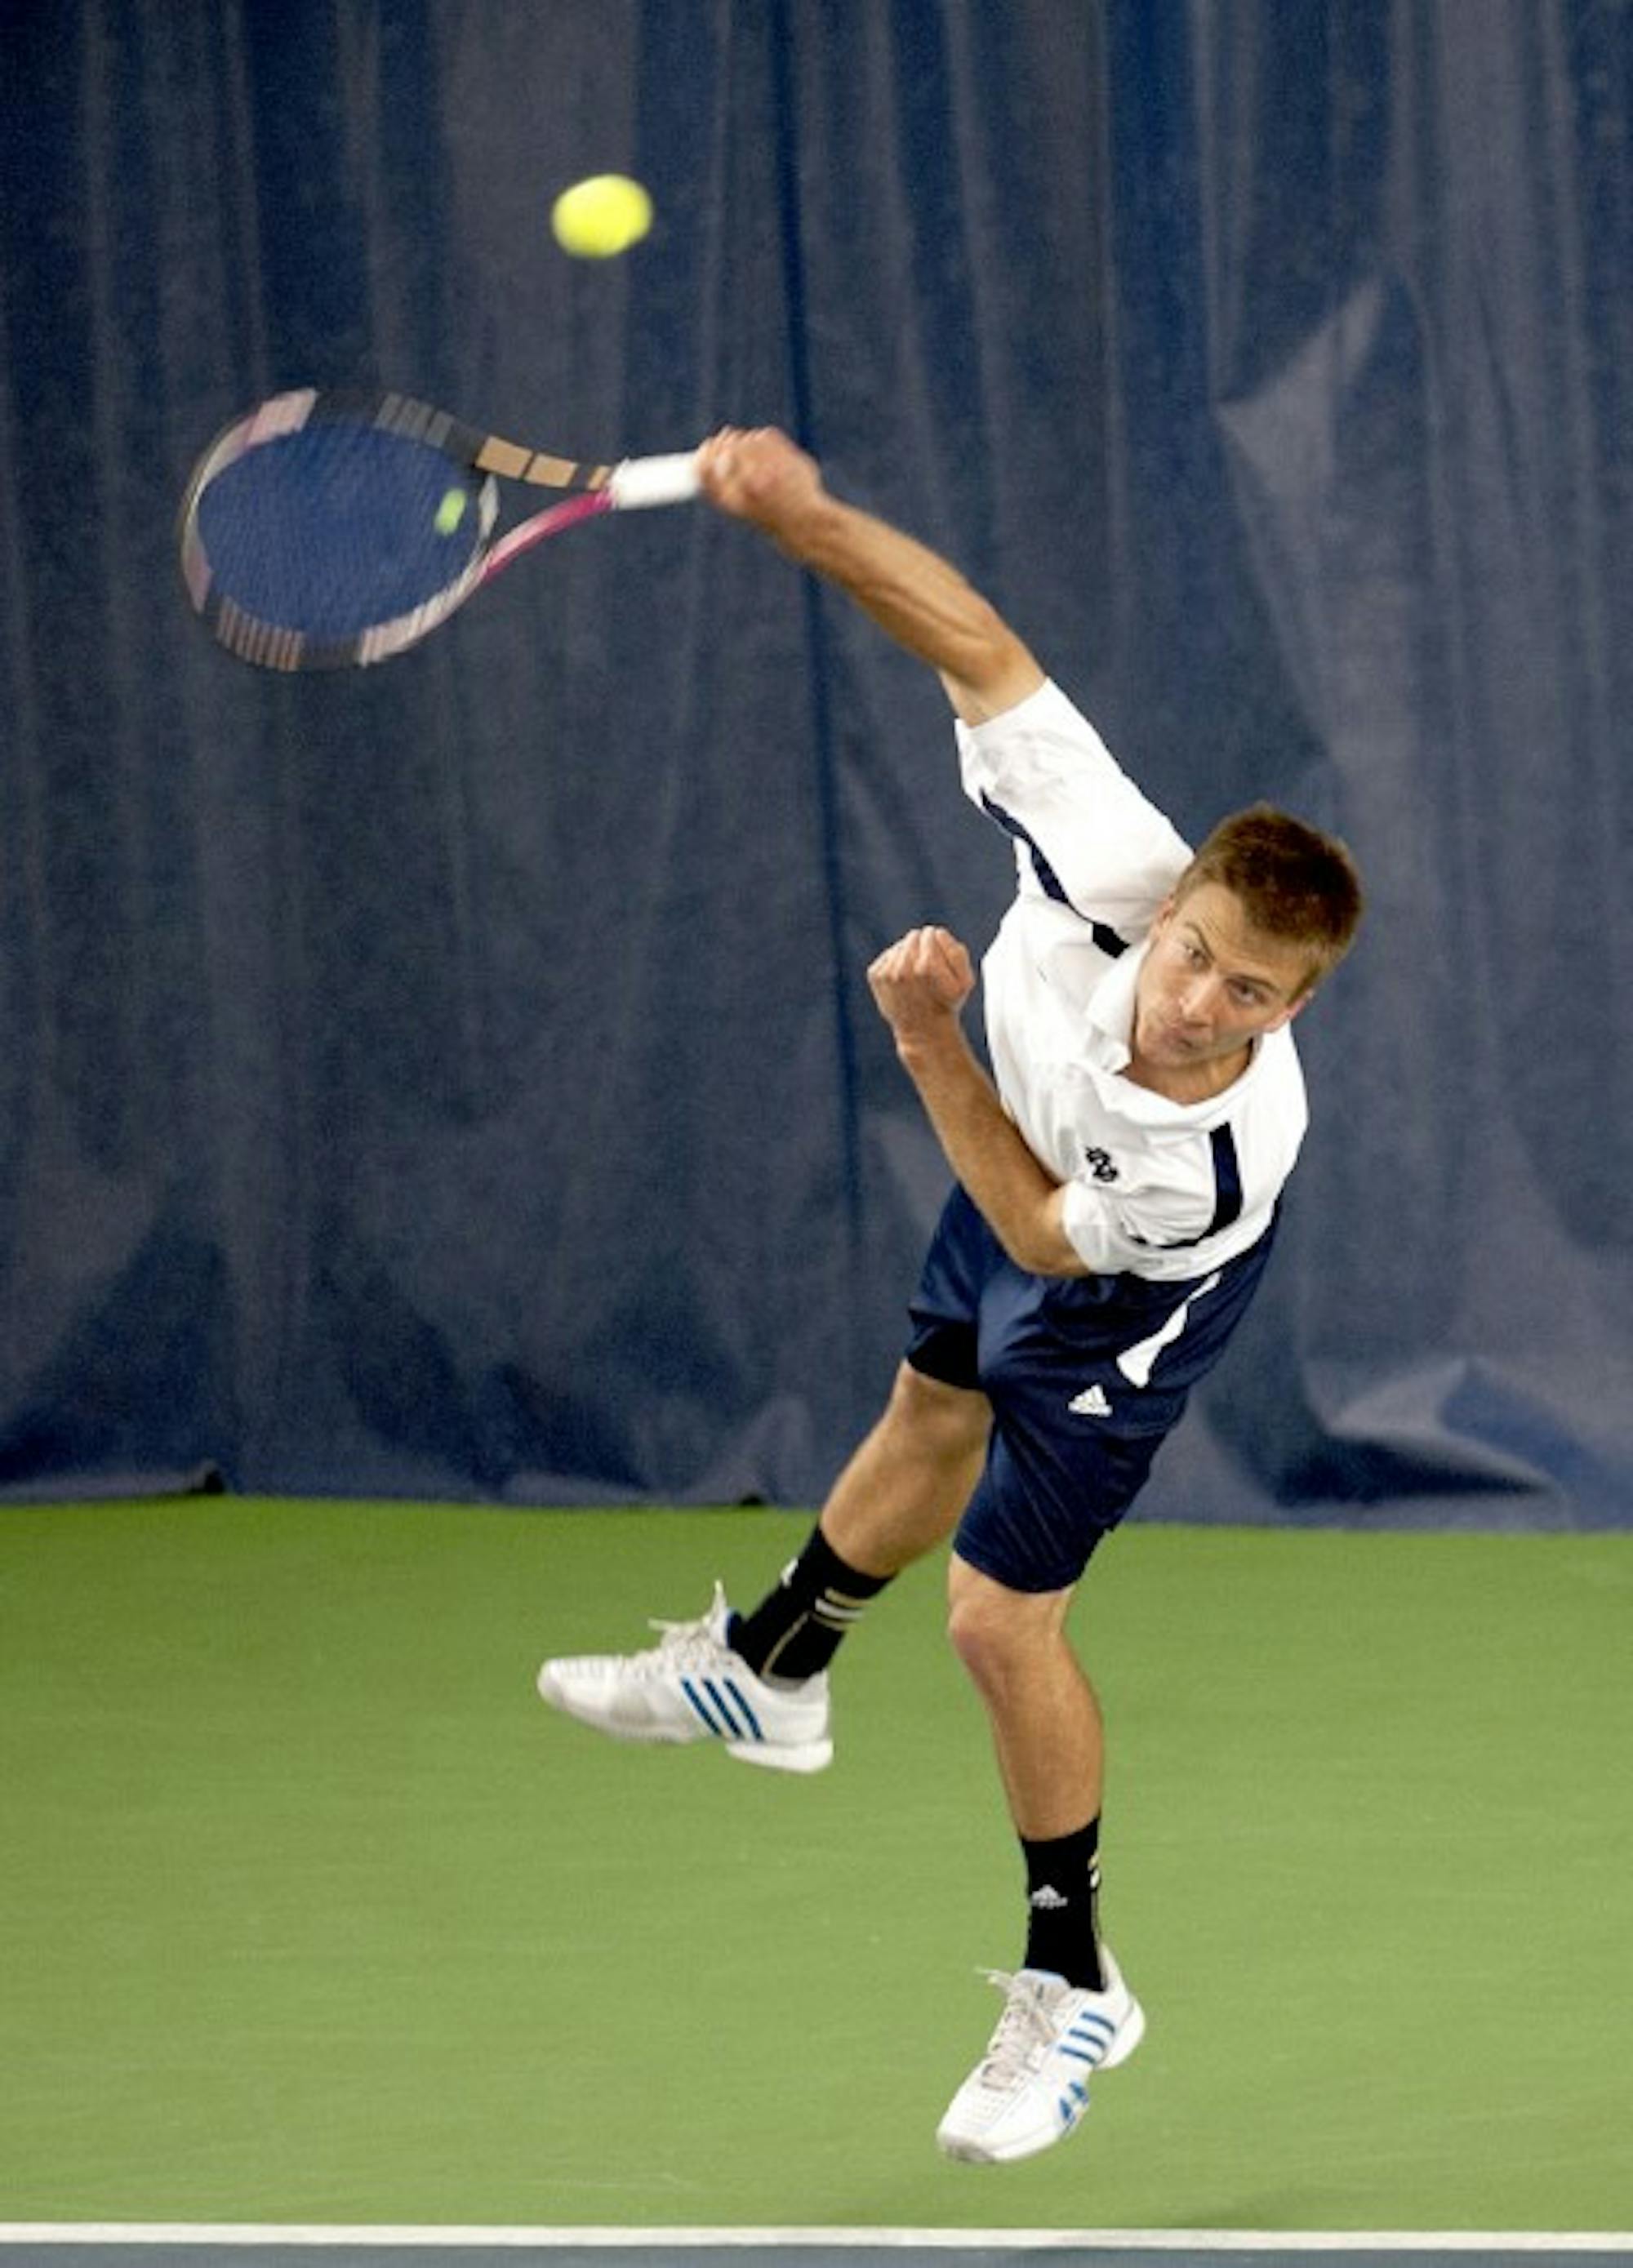 Senior Matt Dooley fires a serve against SMU on April 4. Dooley wrote about his life as a gay athlete at Notre Dame in a recent article.